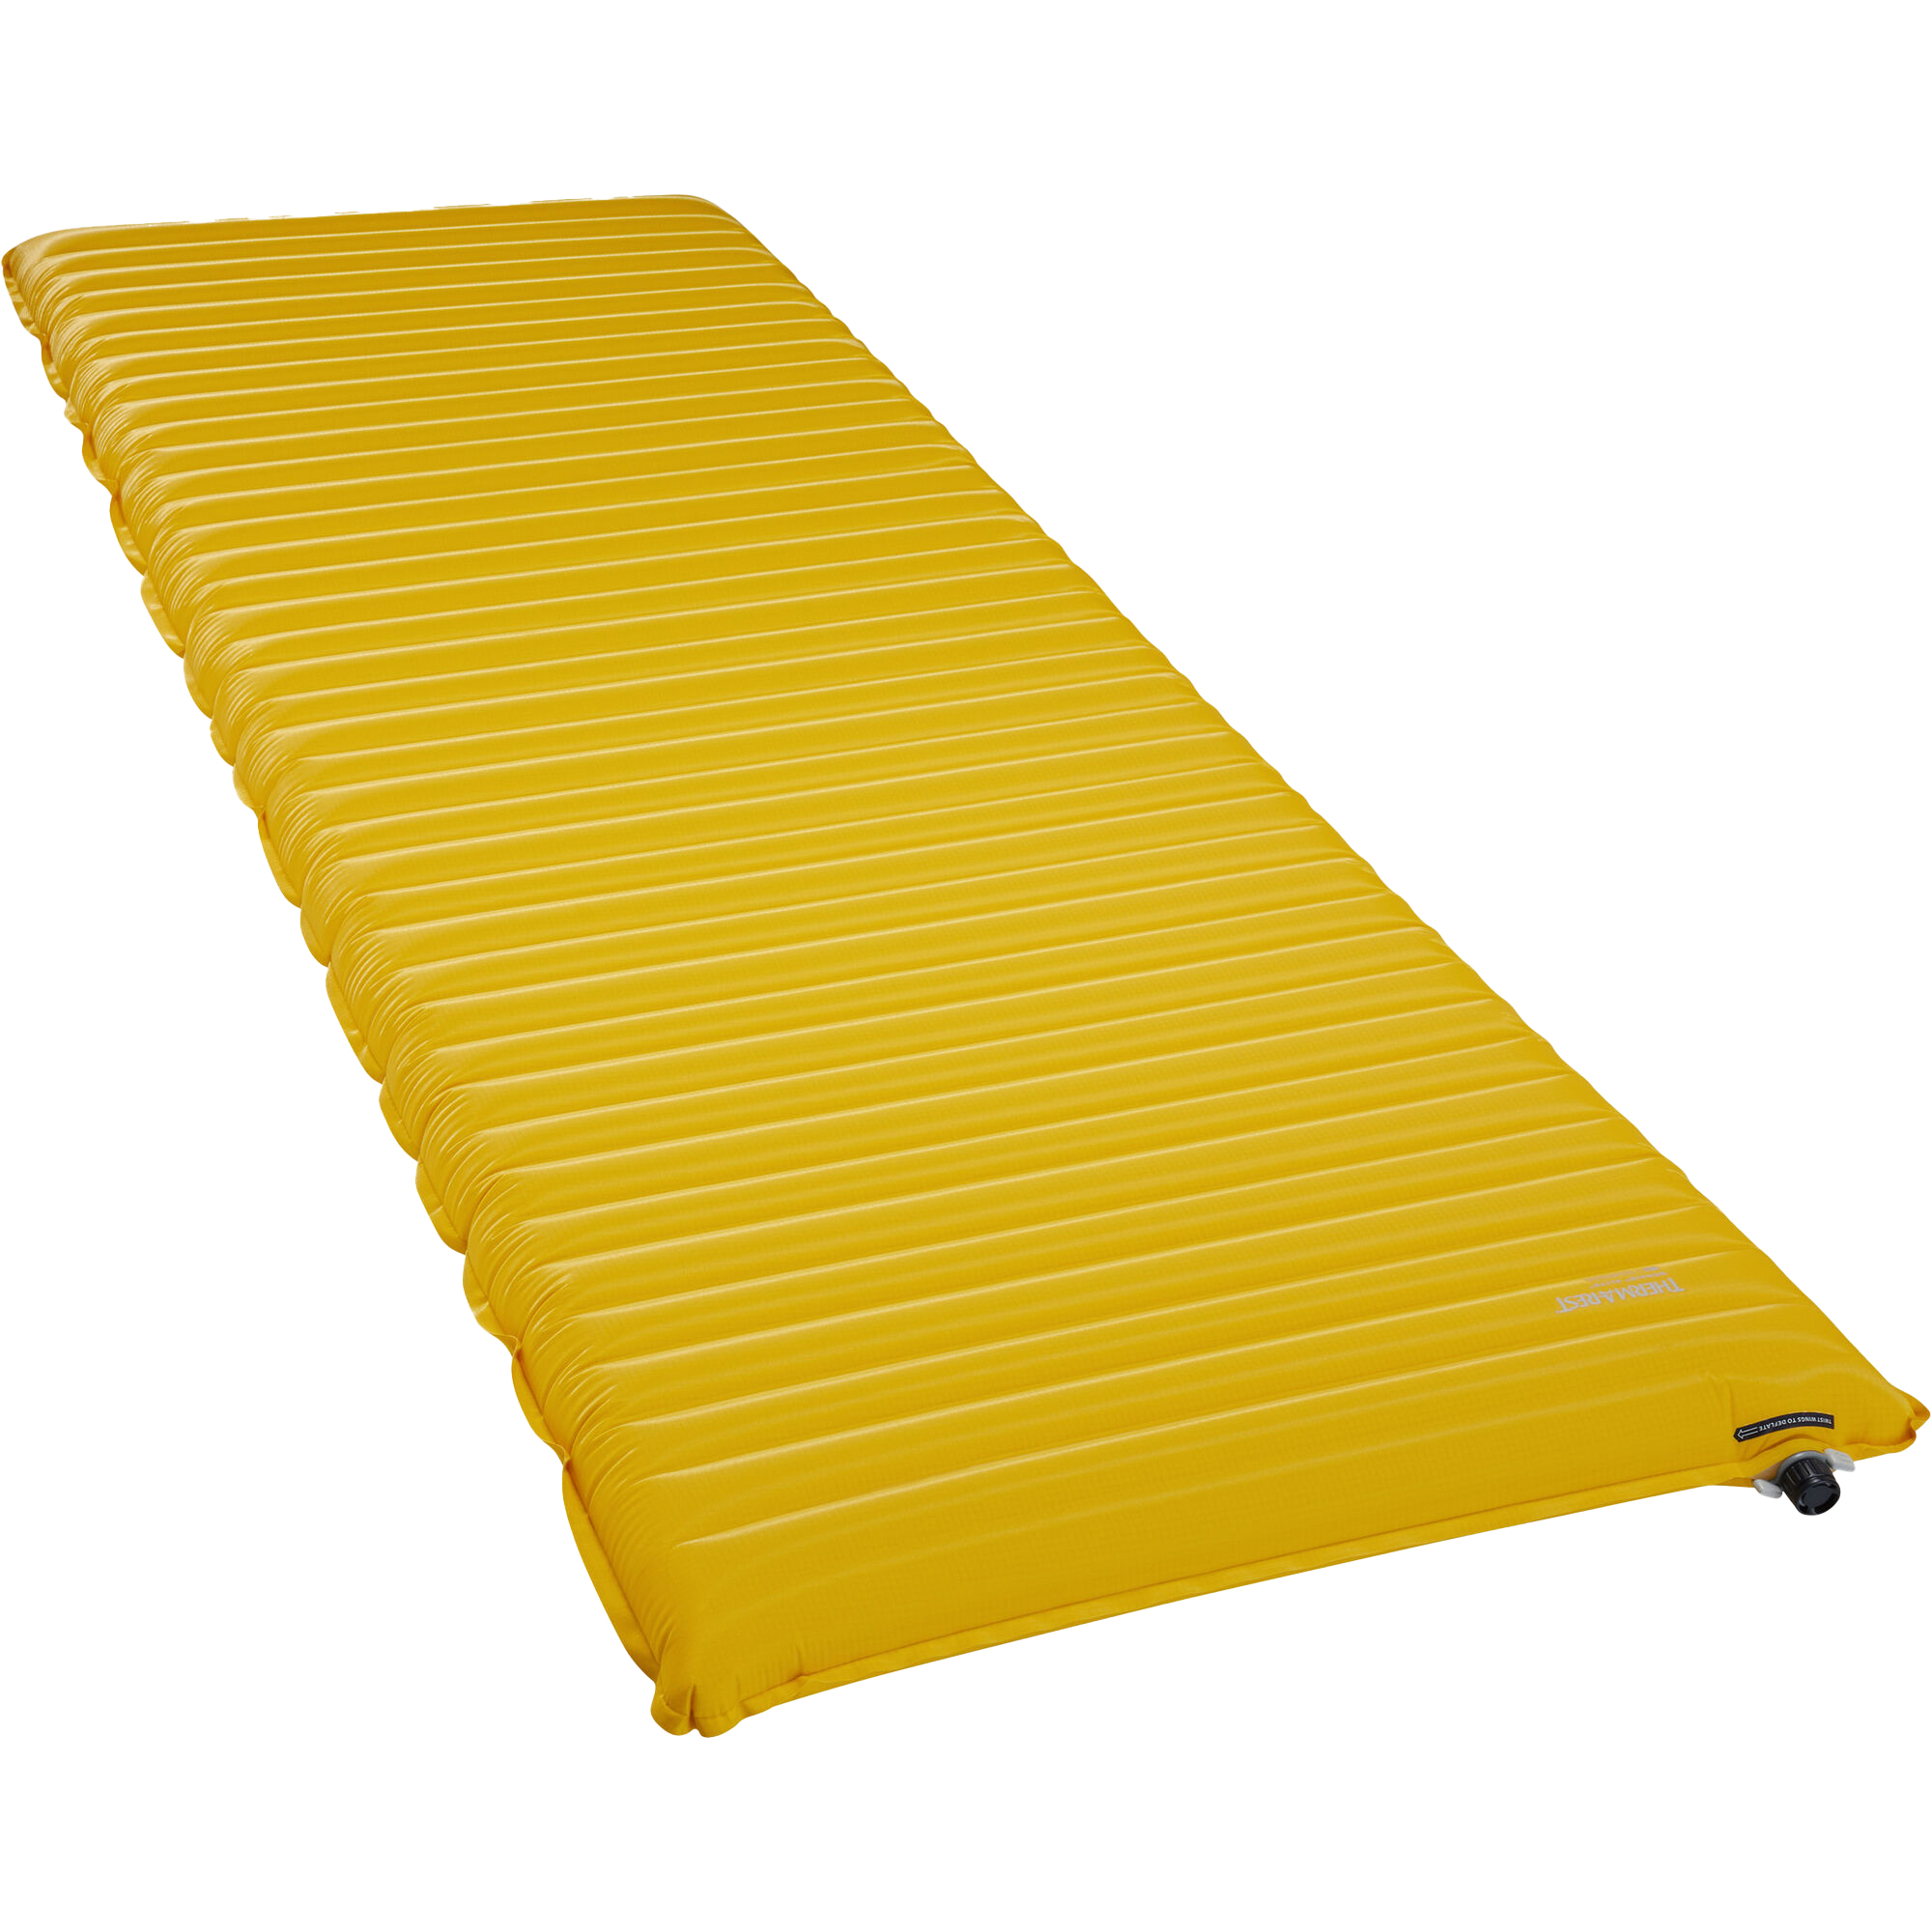 Photos - Camping Mat Therm-a-Rest ThermaRest NeoAir Xlite NXT MAX Large , Solar Flare 11632 